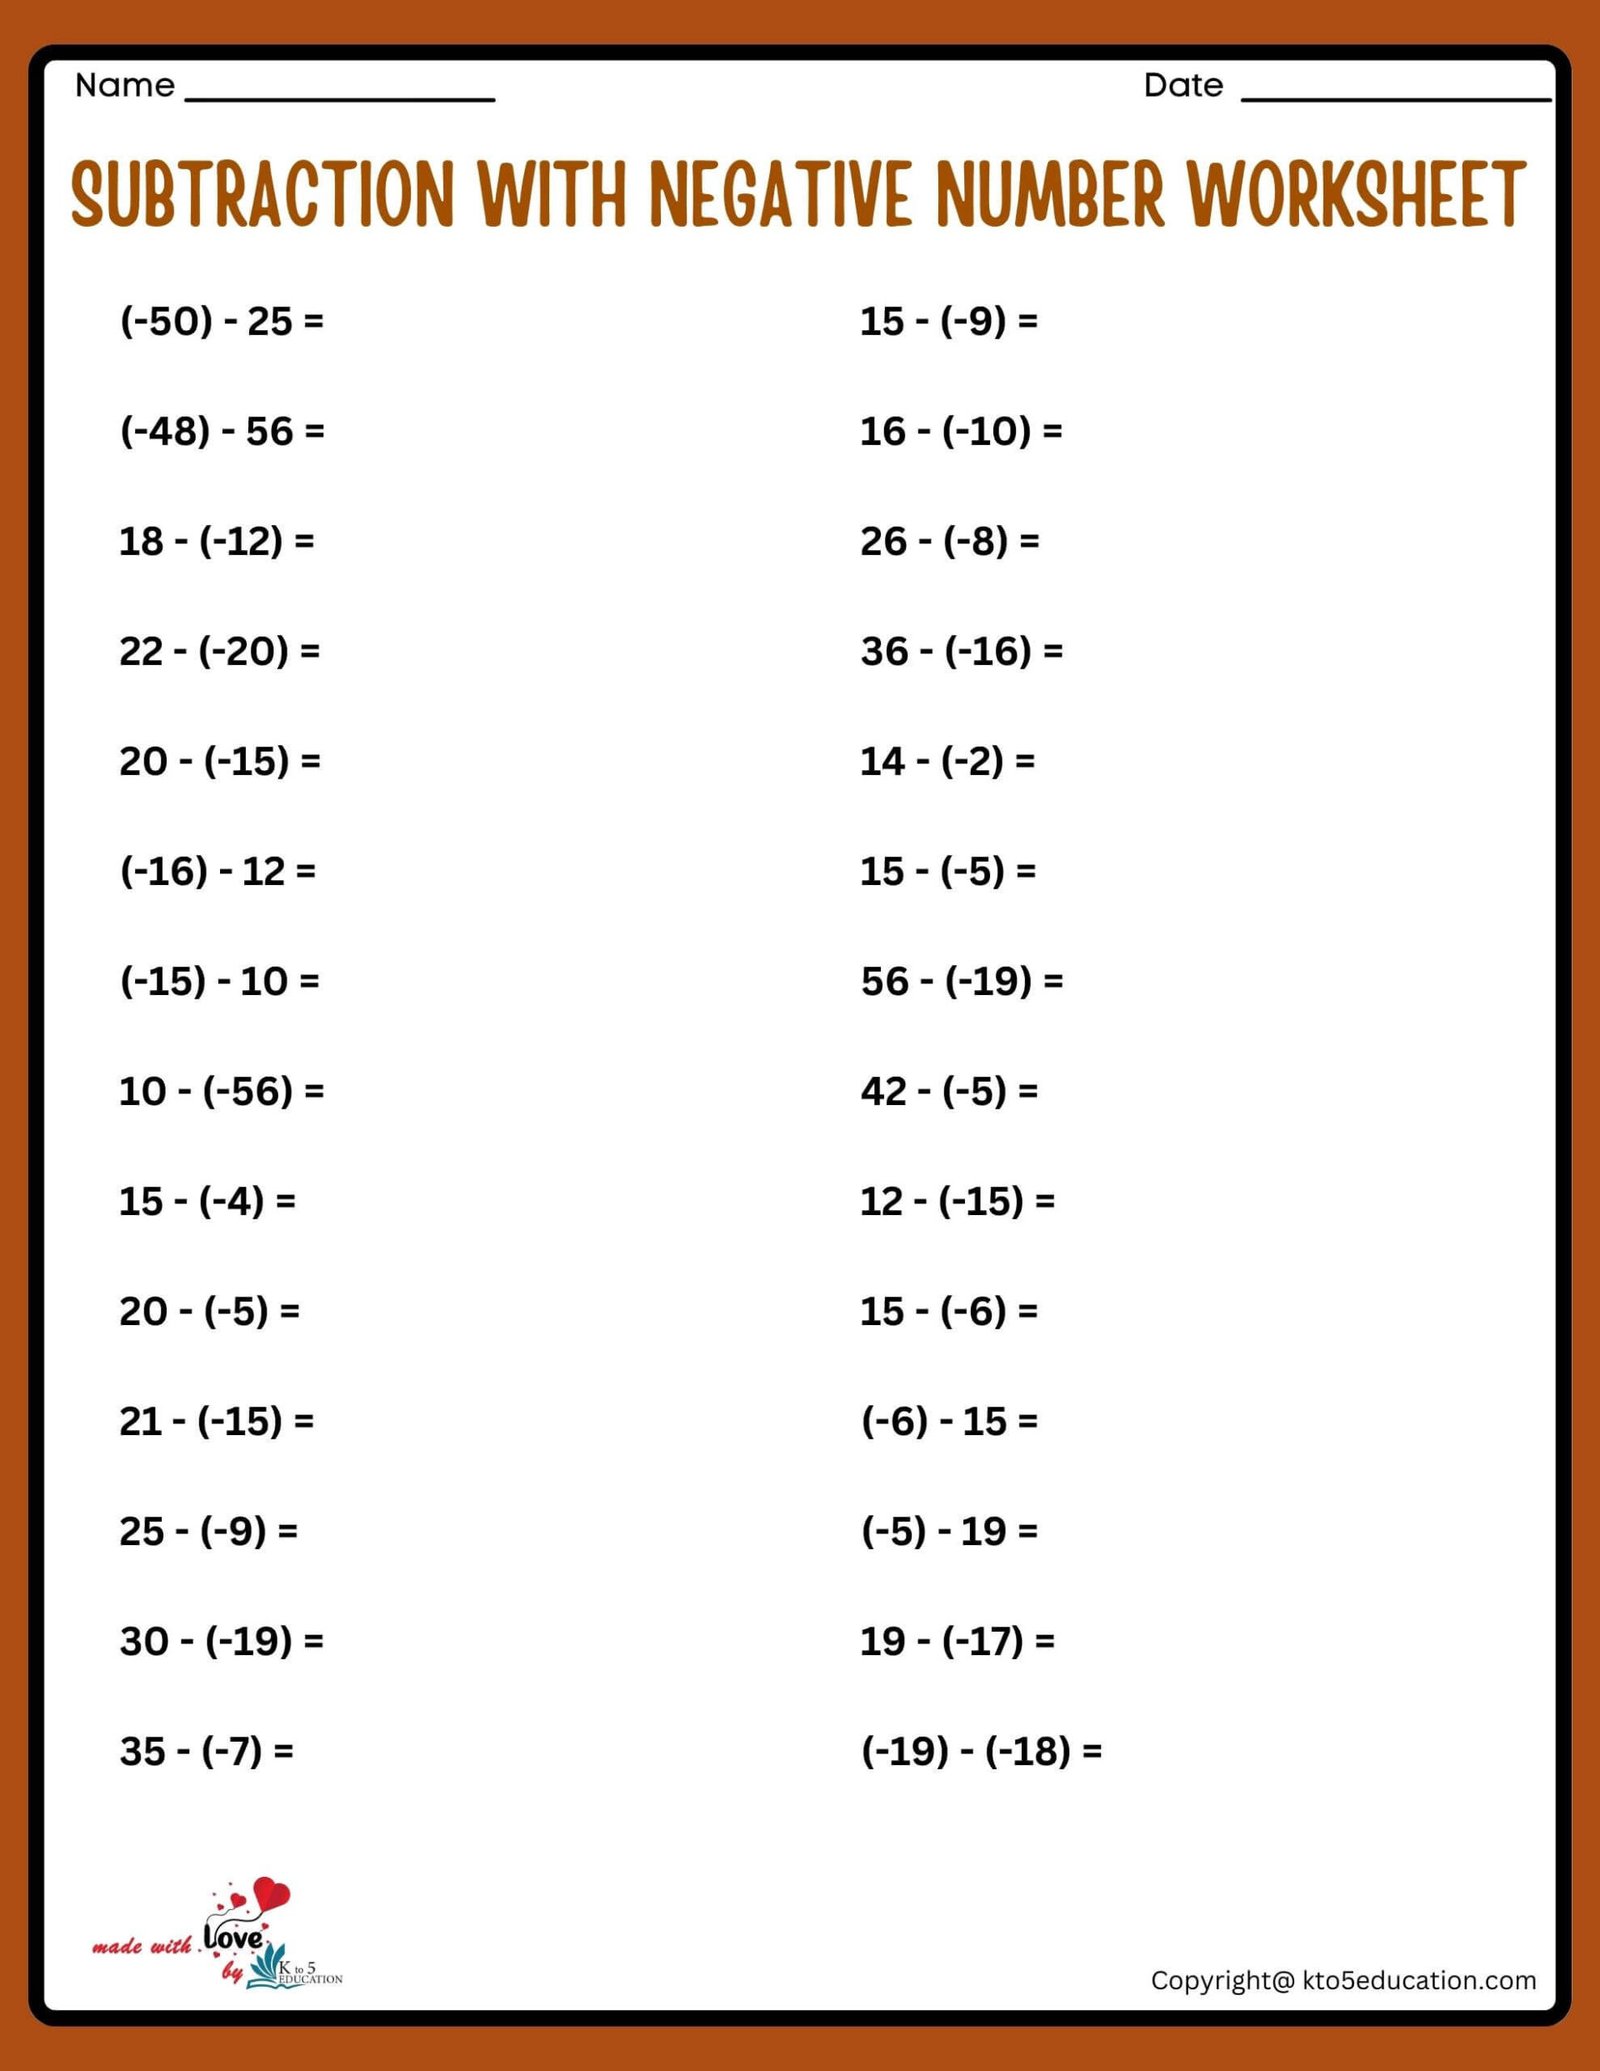 subtracting-positive-and-negative-numbers-worksheet